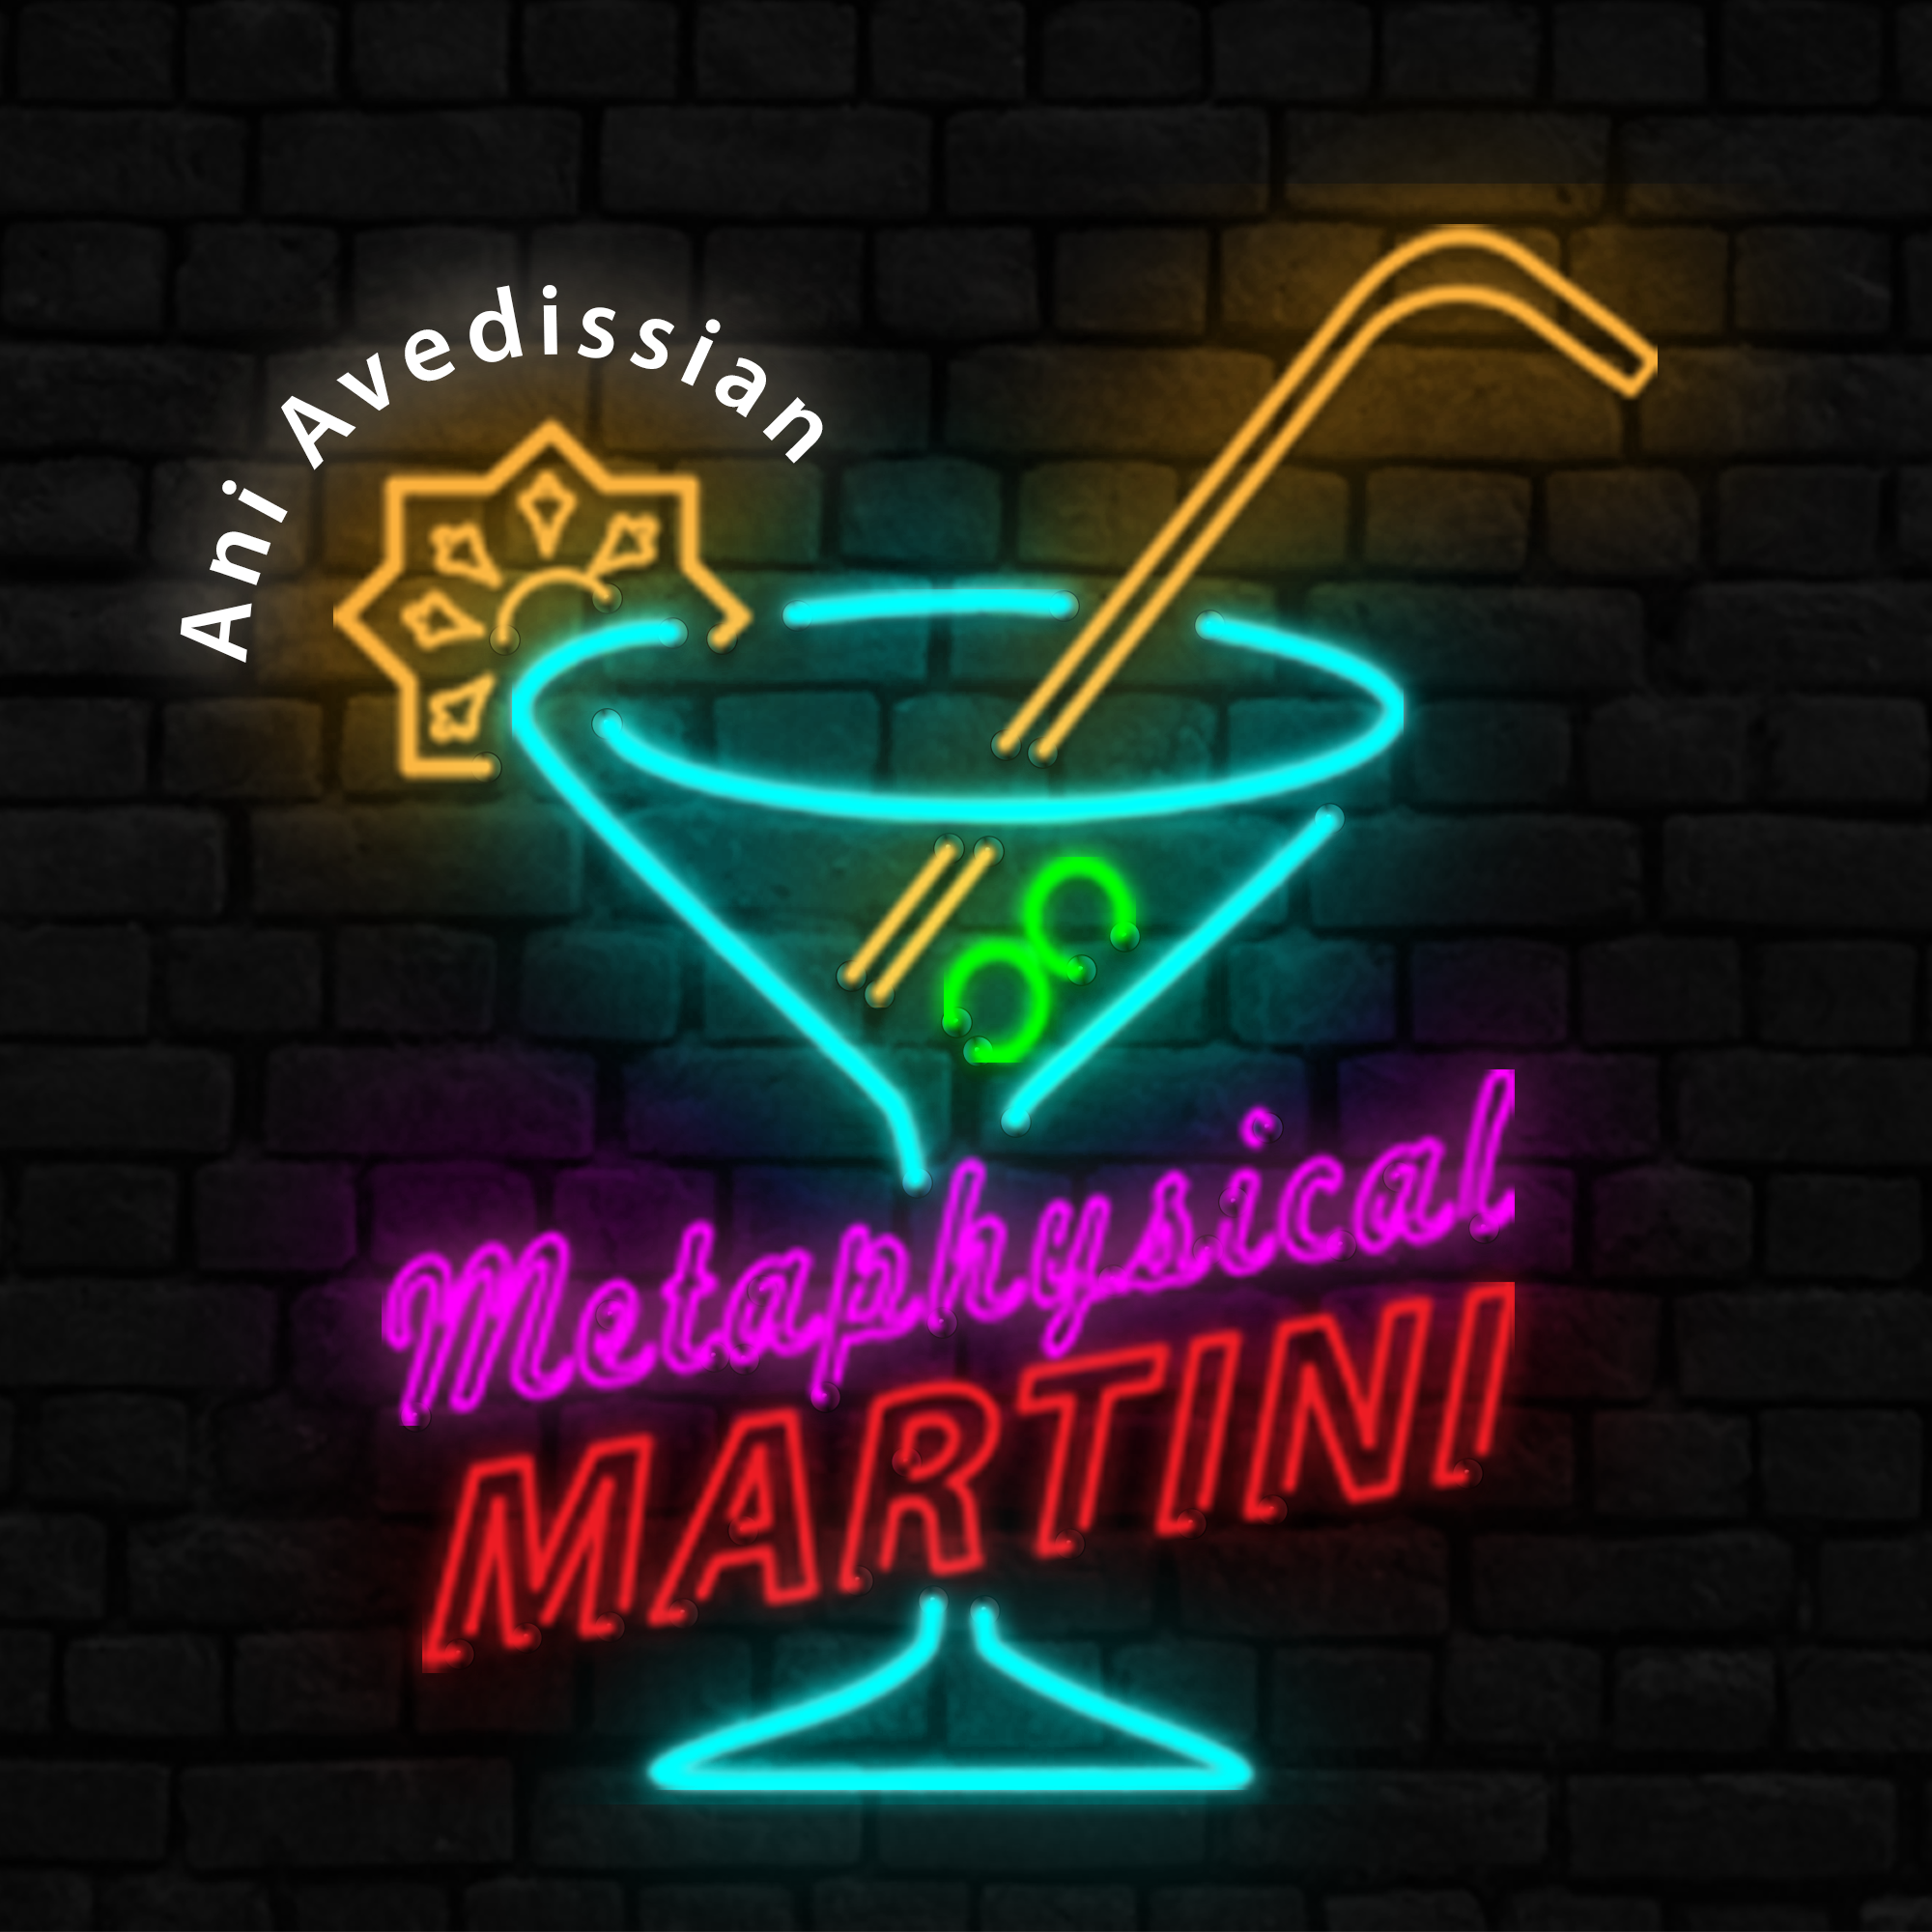 "Metaphysical Martini"   09/18/2019  Experiences with the slightly paranormal